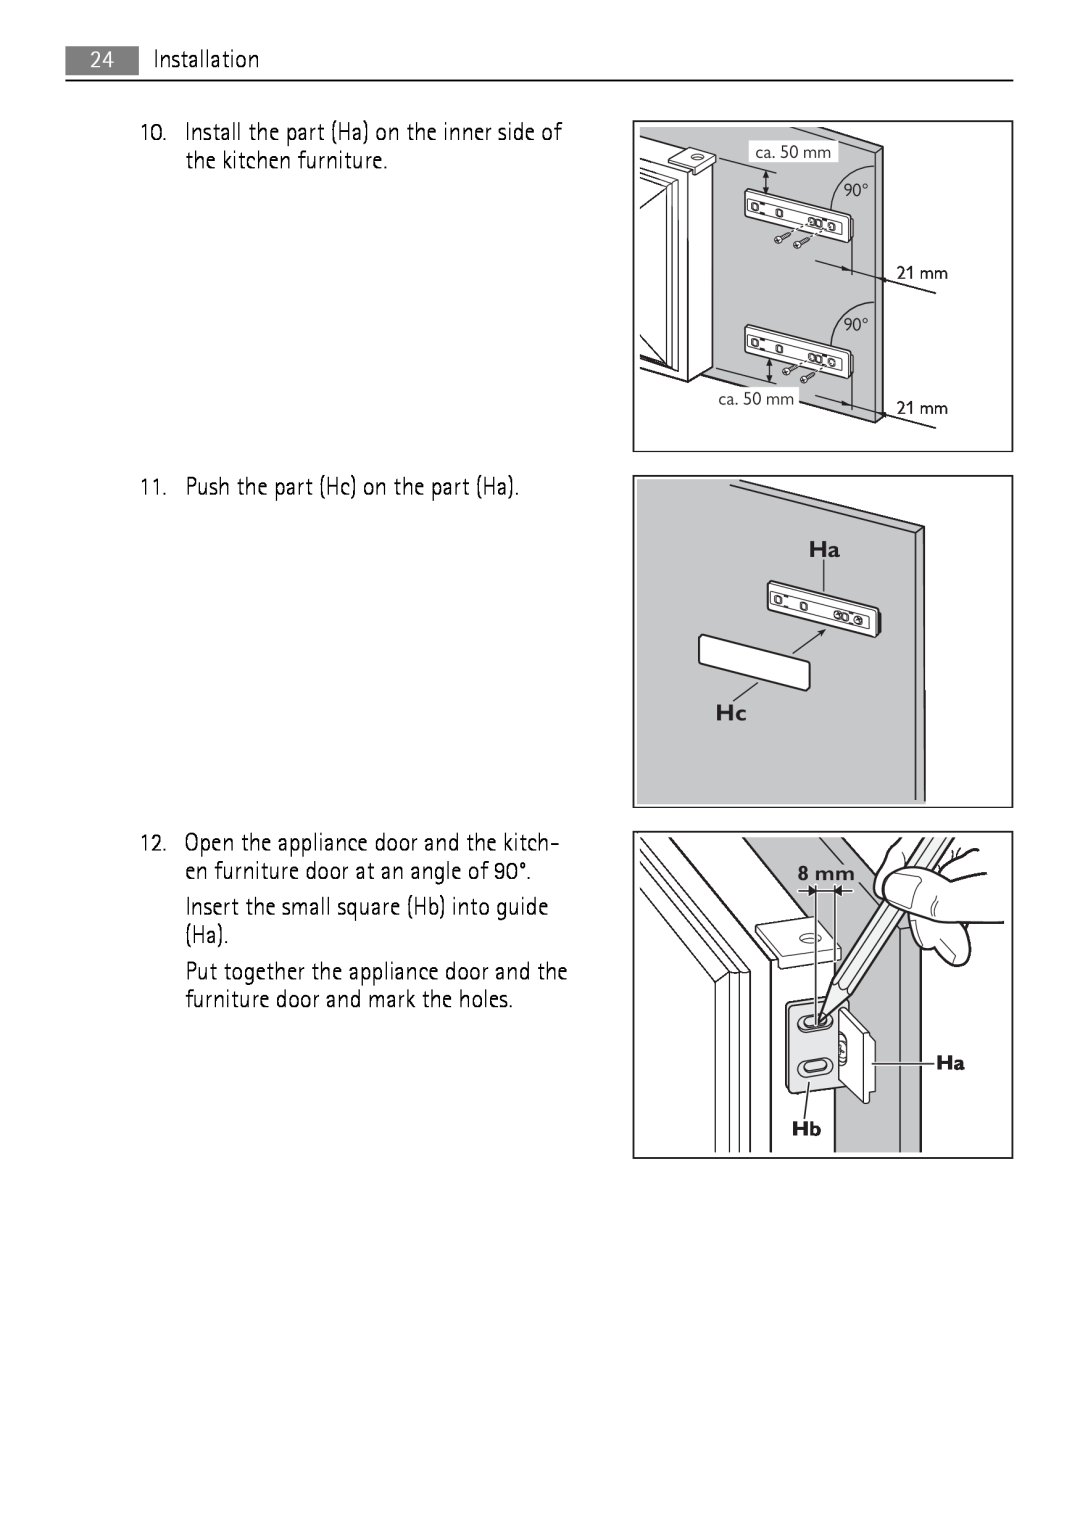 AEG SCT71900S0 user manual Installation, Install the part Ha on the inner side of the kitchen furniture, 8 mm 